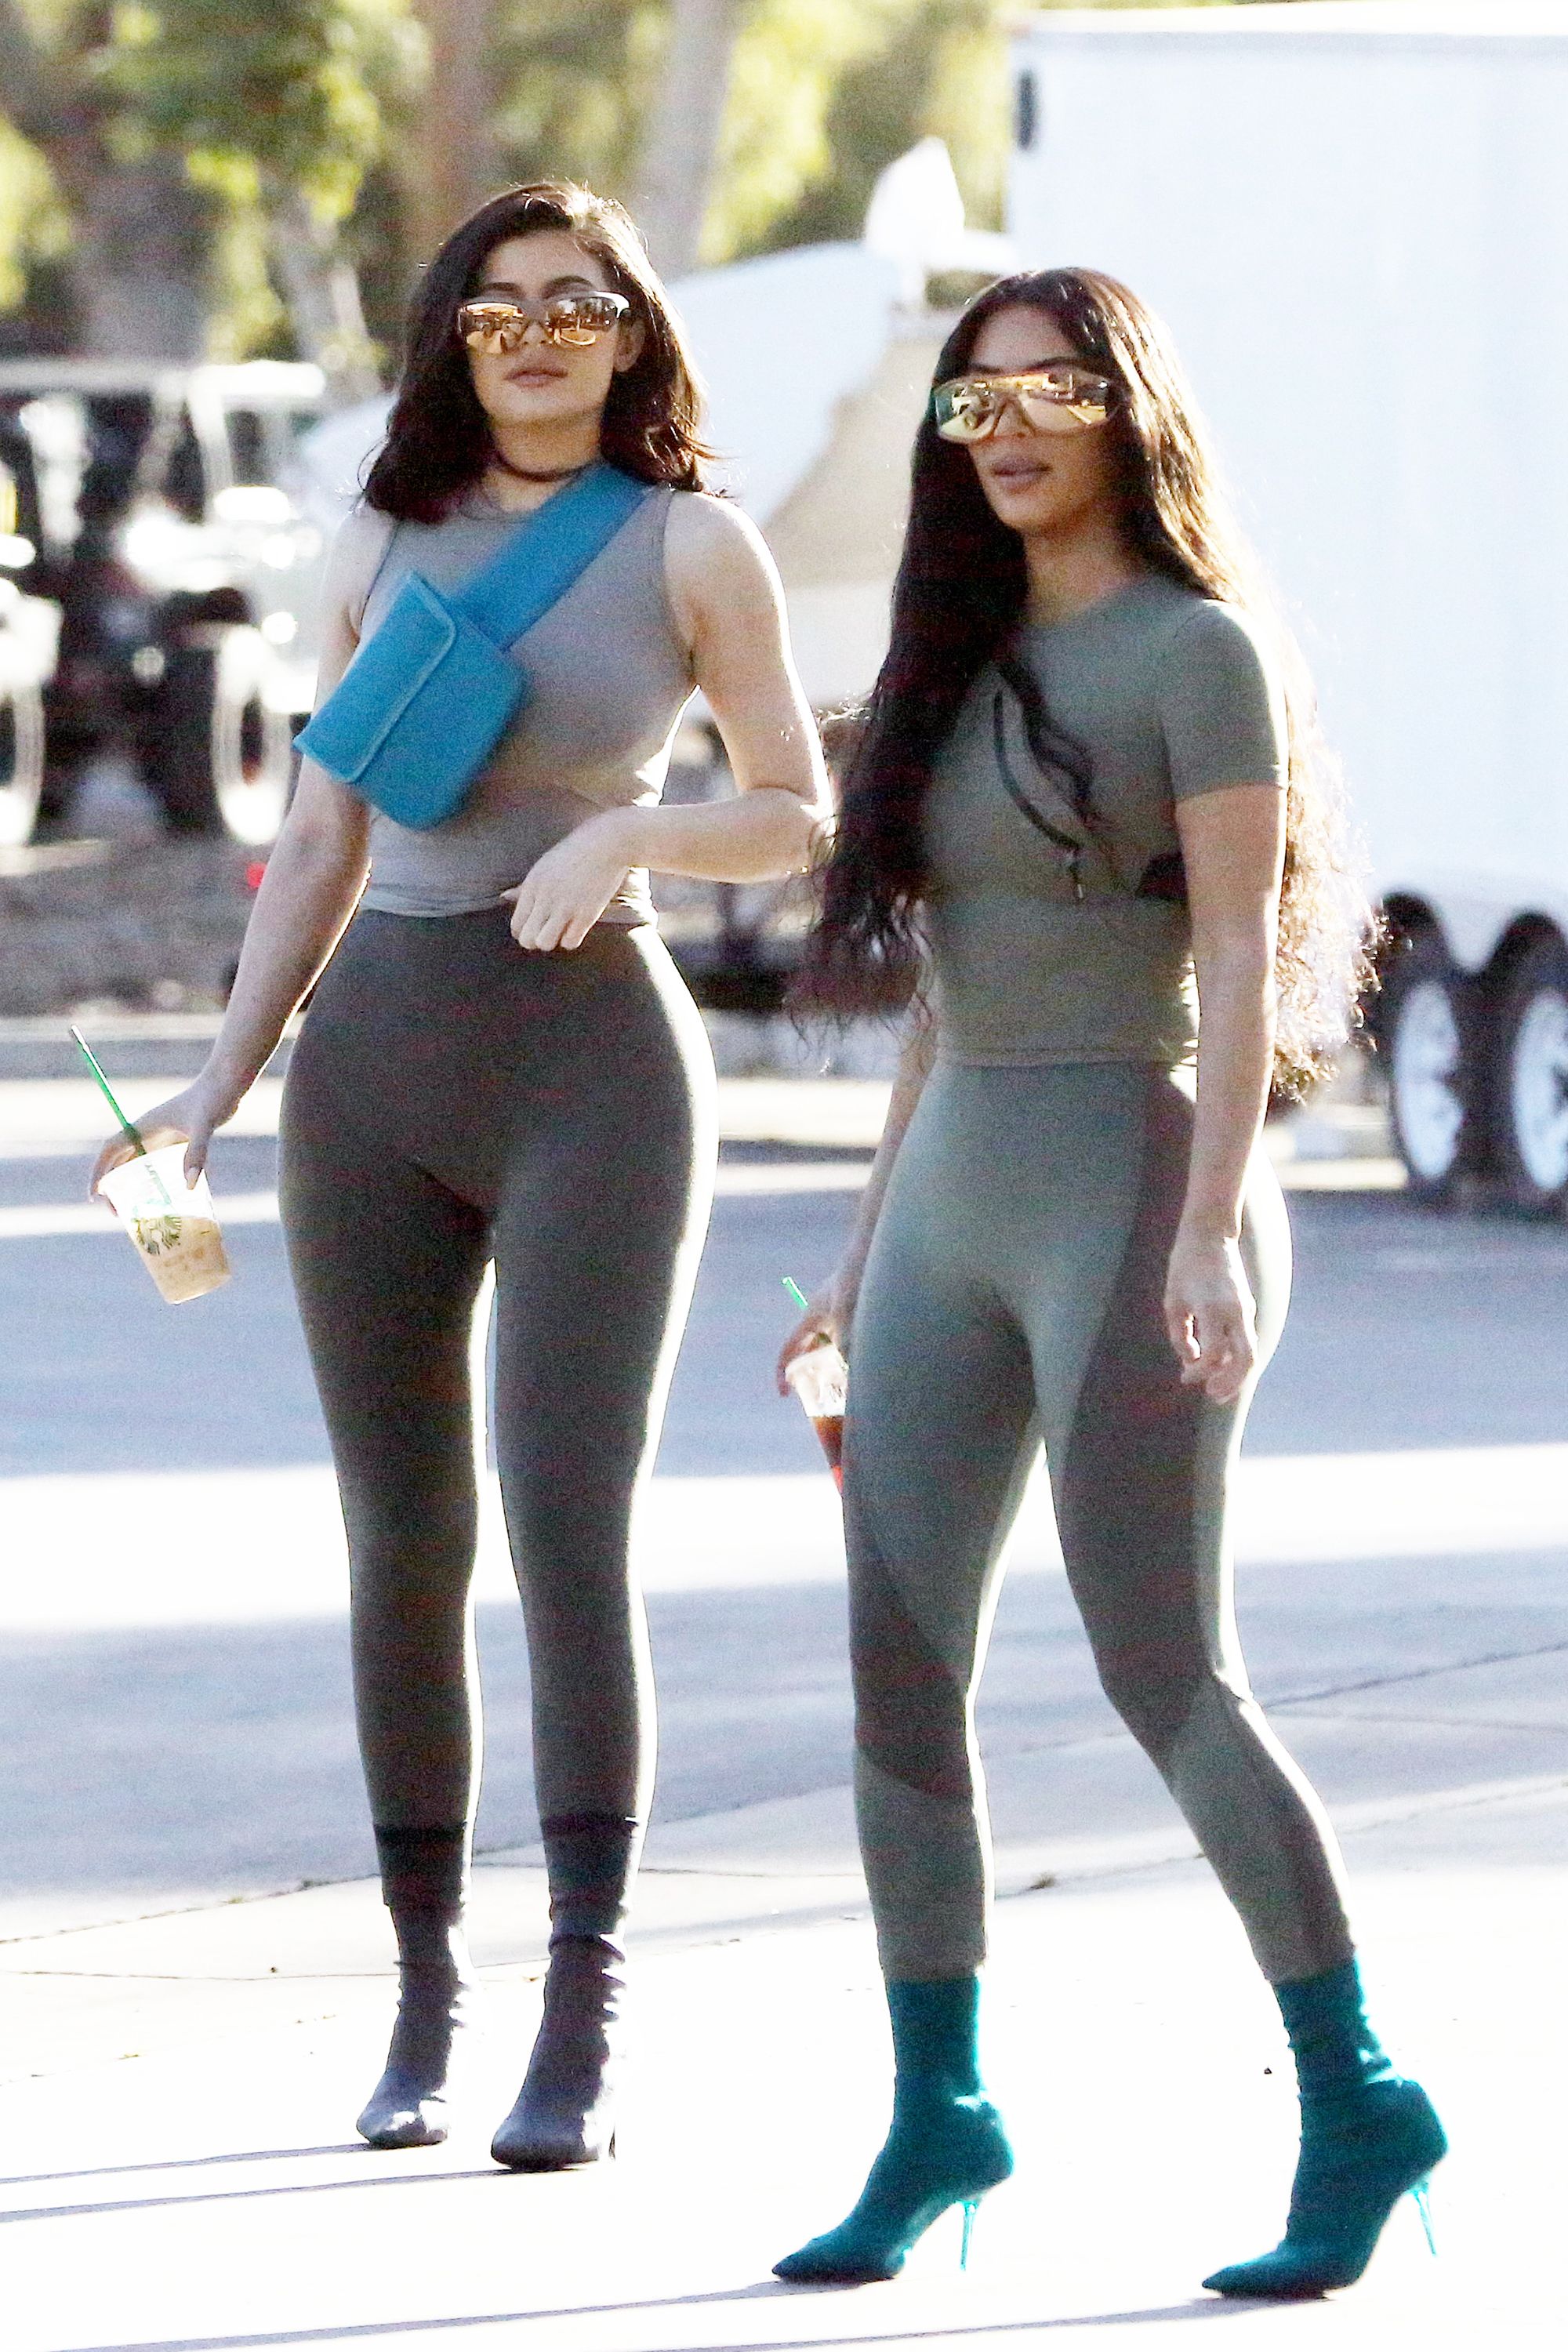 Kim Kardashian and Kylie Jenner Are Twinning in Skin-Tight Outfits